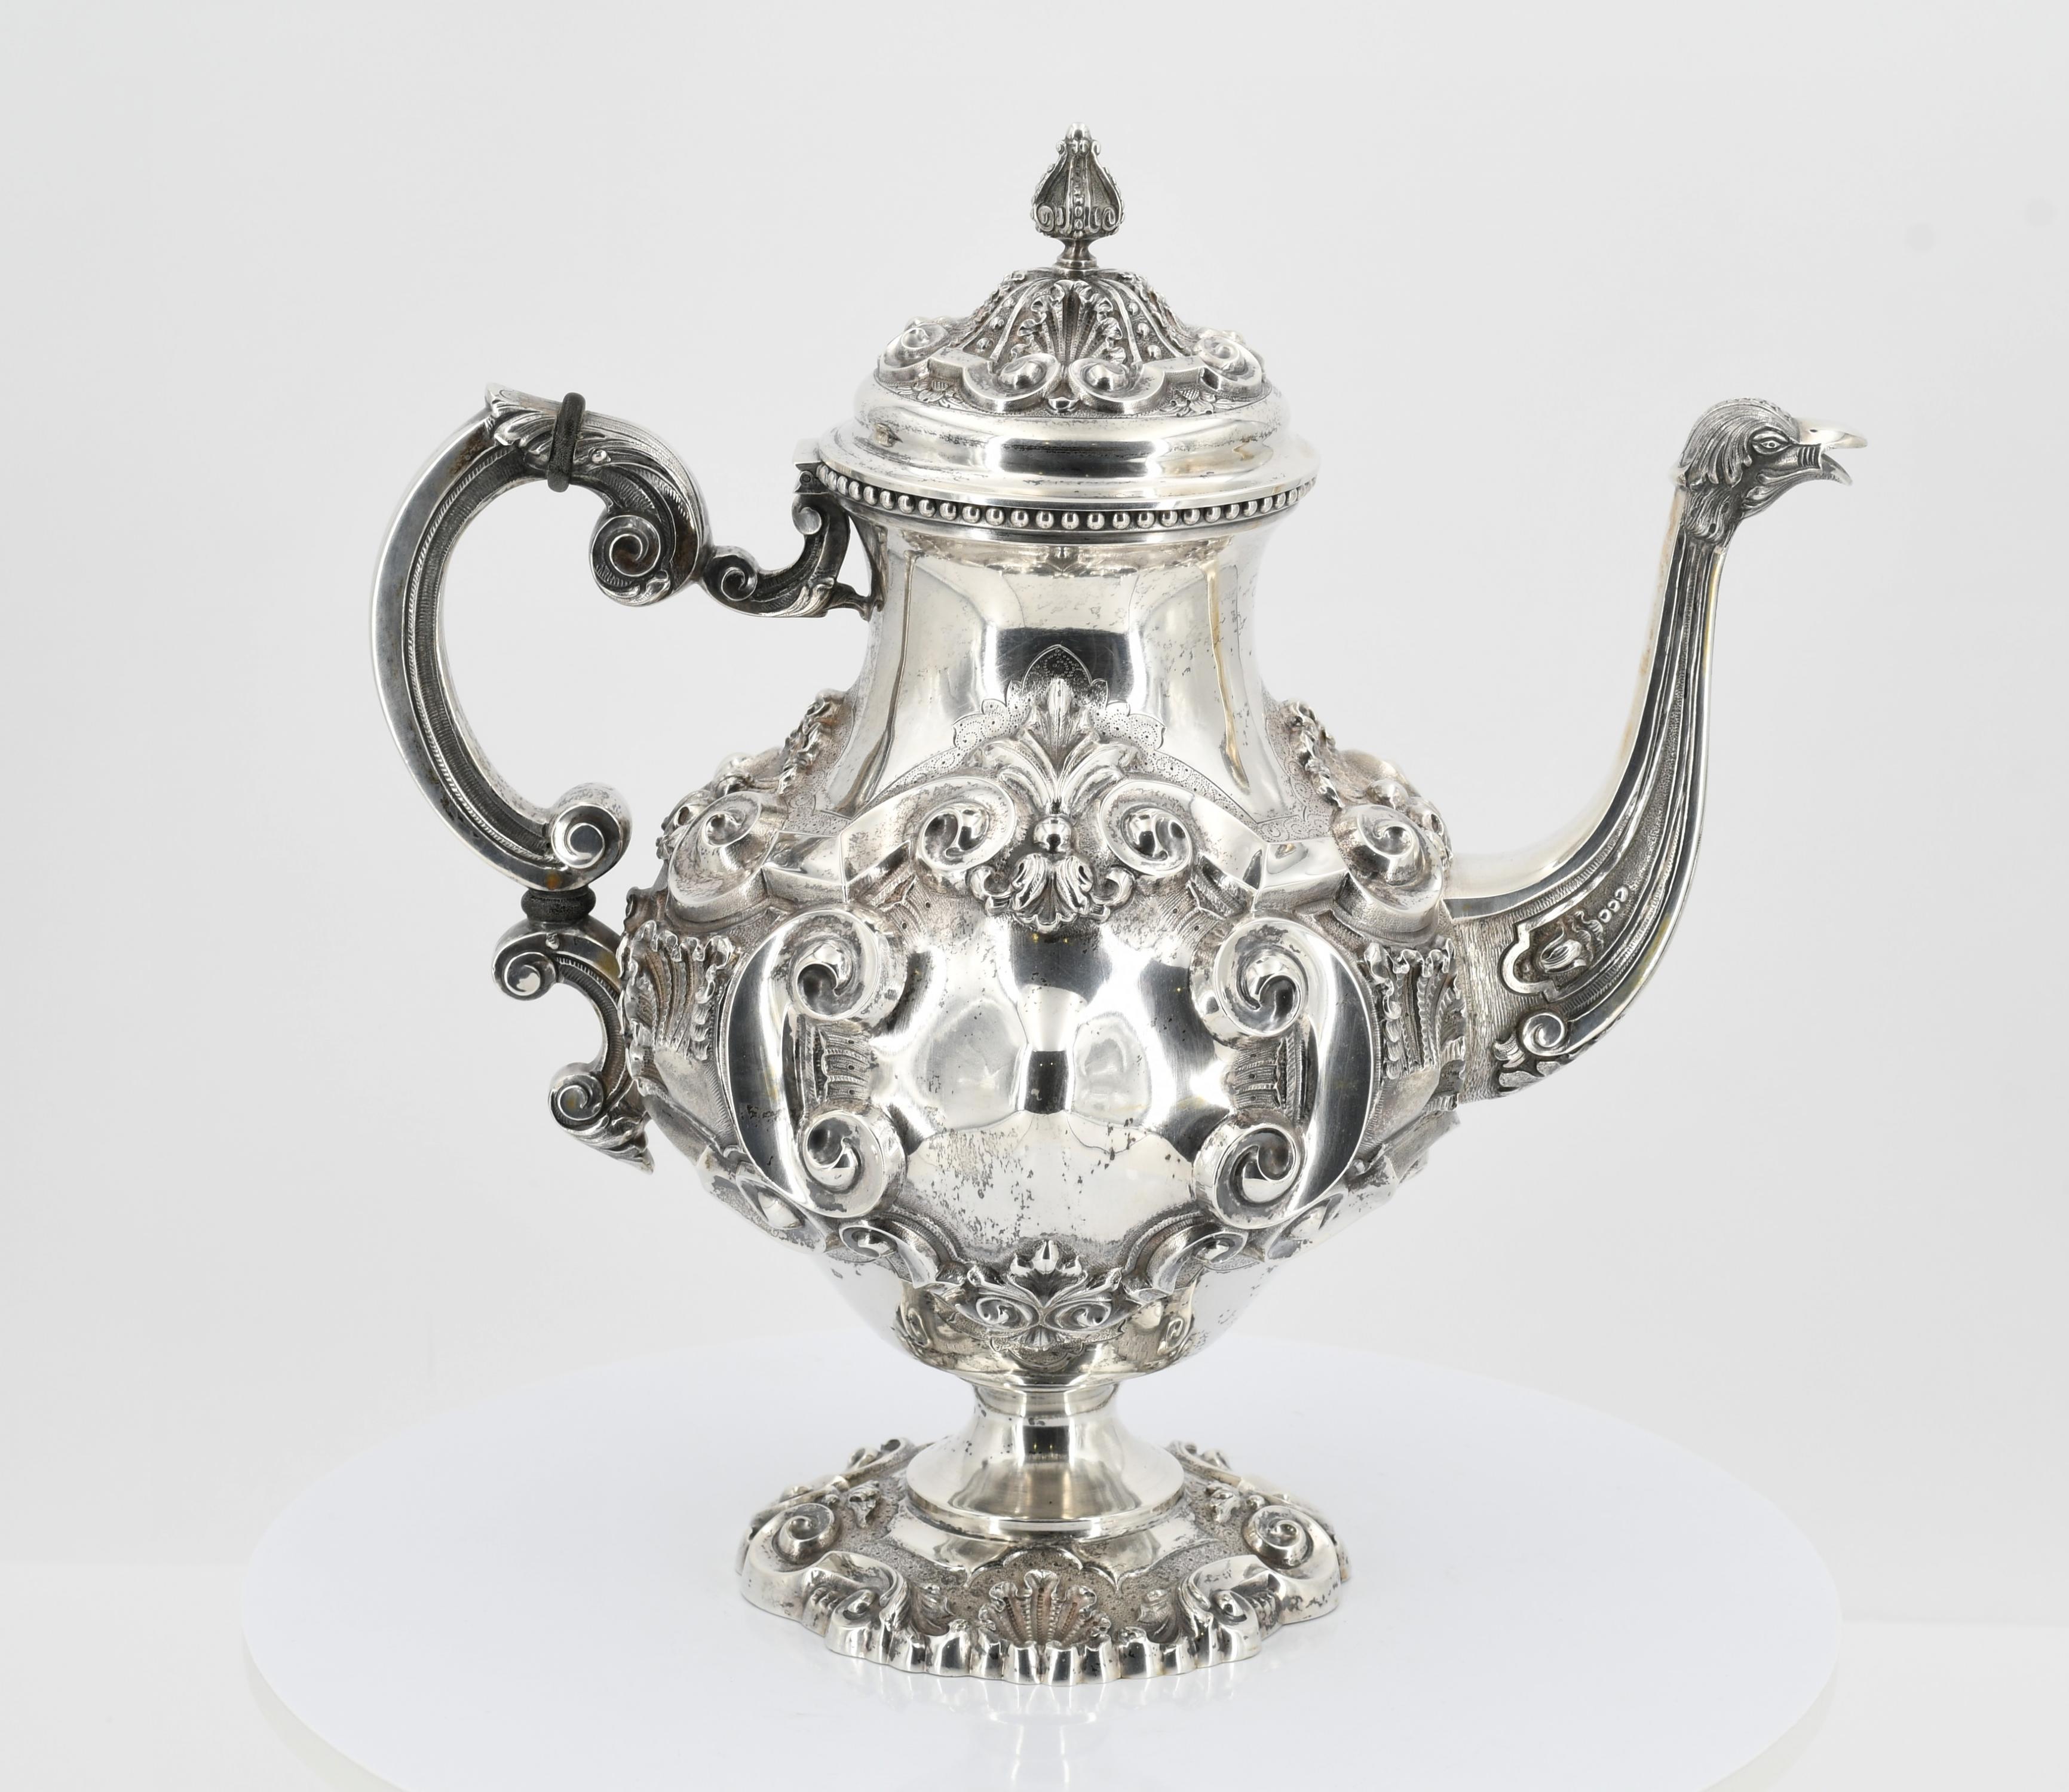 Magnificent Coffee and Tea Service with Tray - Image 16 of 27